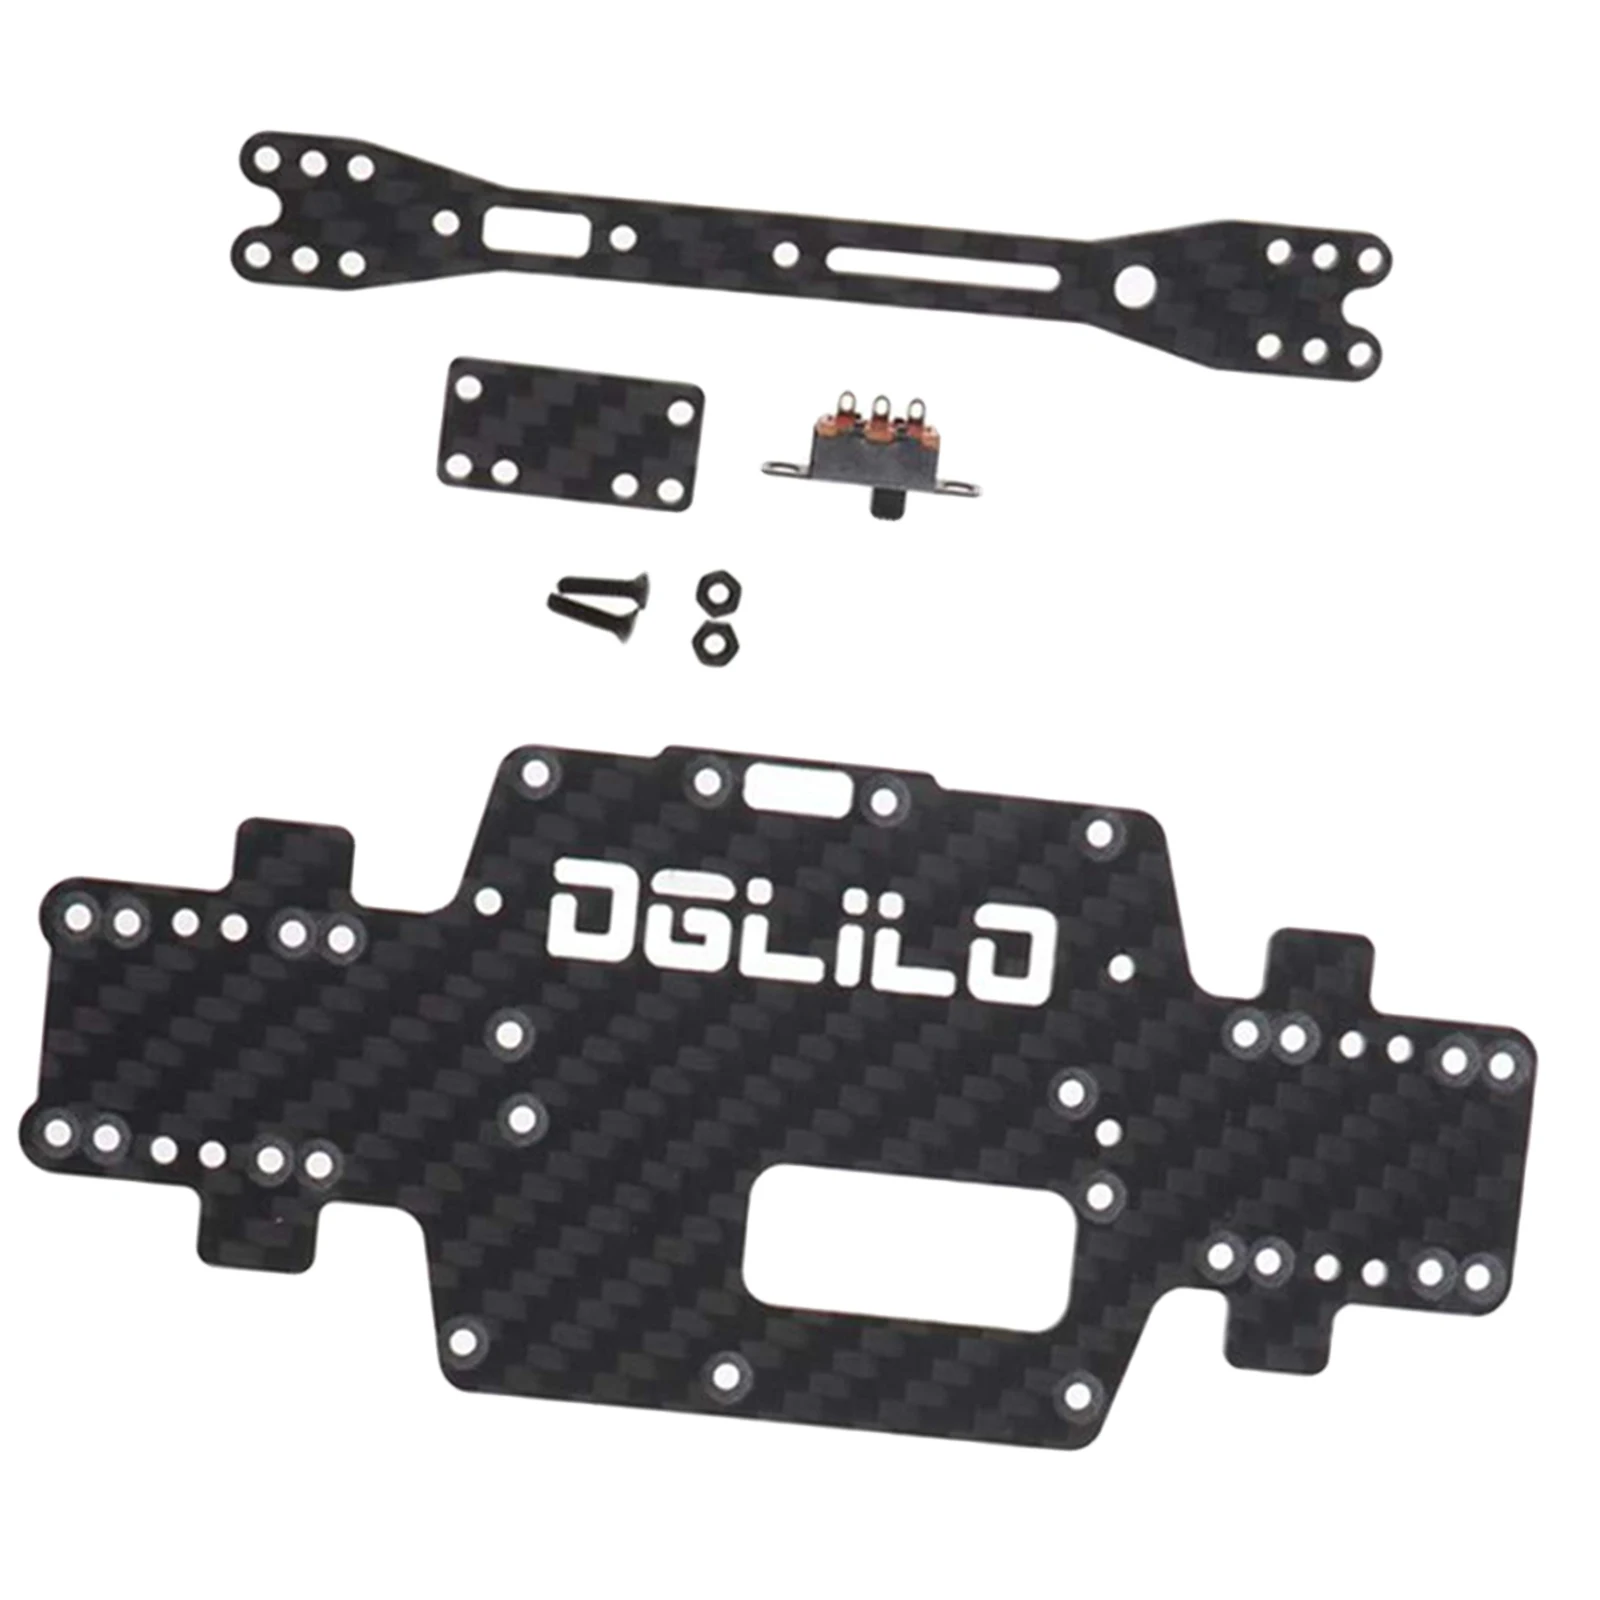 RC Chassis Body Plate for Wltoys K999 P939 1/28 RC Truck Electric Toy Replacement Parts Accessories